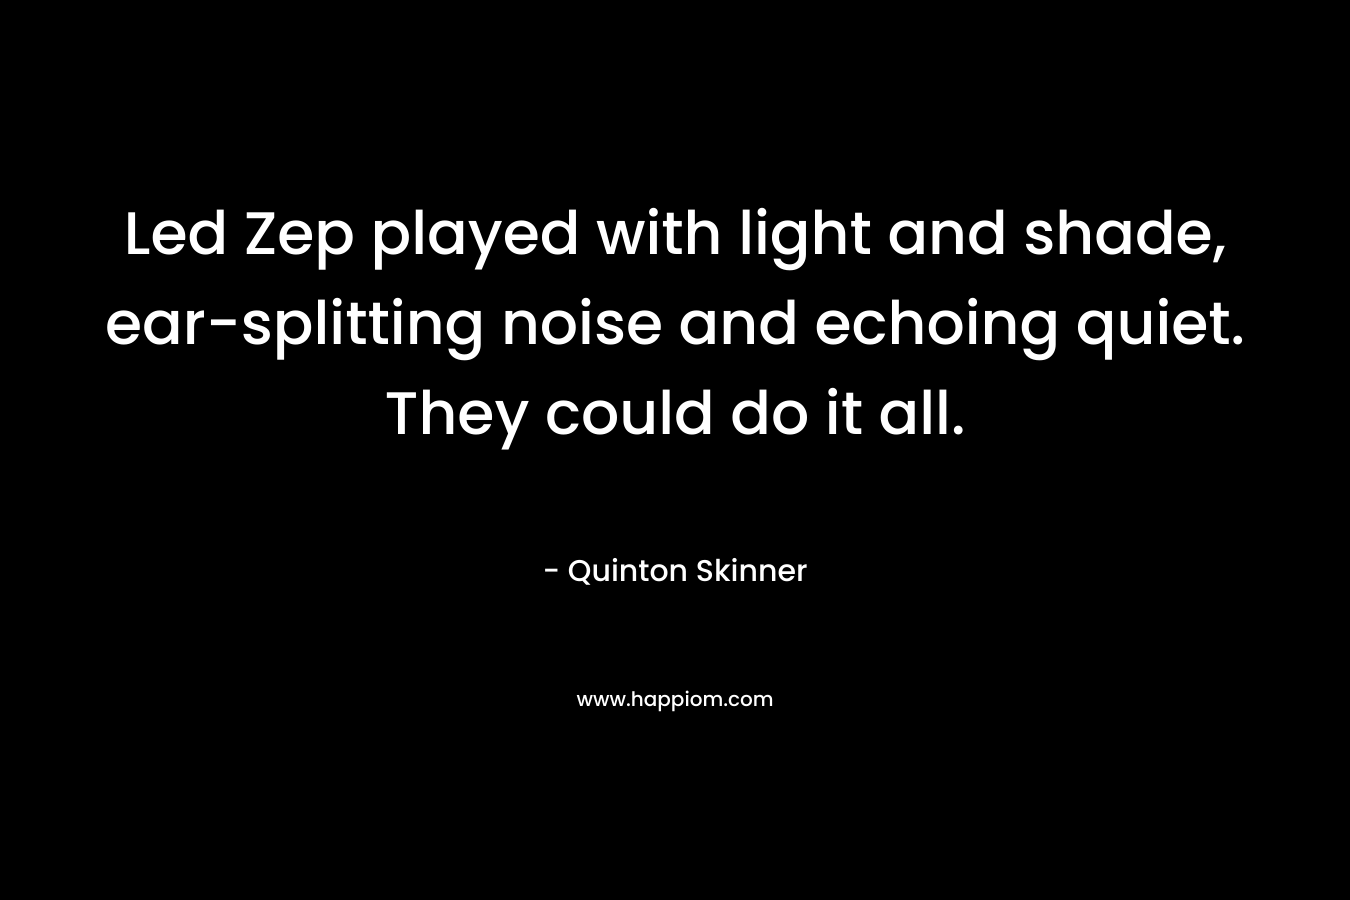 Led Zep played with light and shade, ear-splitting noise and echoing quiet. They could do it all.